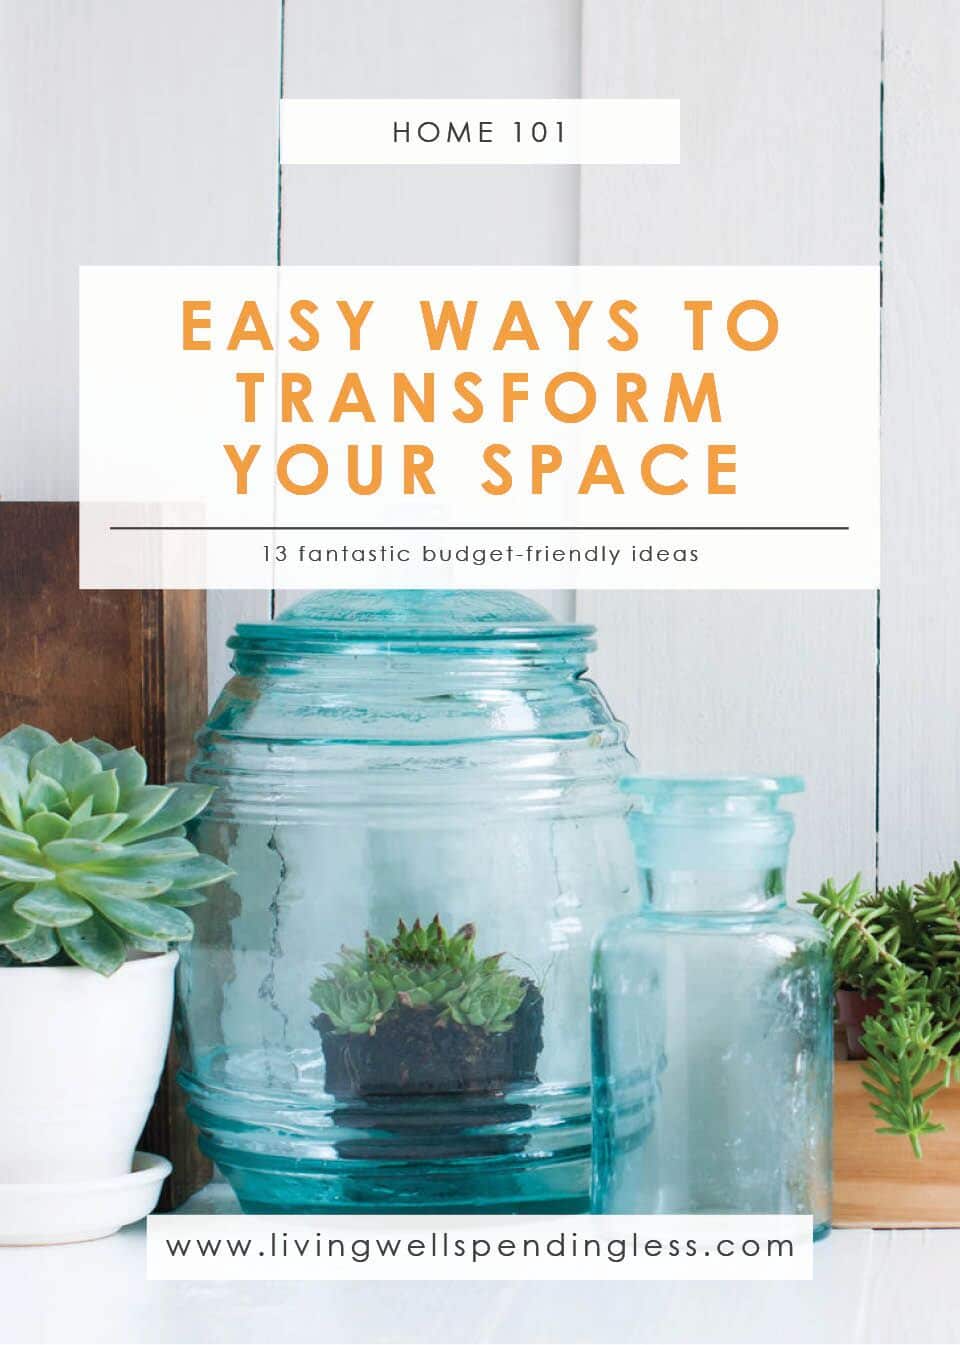 Ways to Transform Your Space | Home Decluttering | Quick Wins for Your Home | Cleaning & Organizing